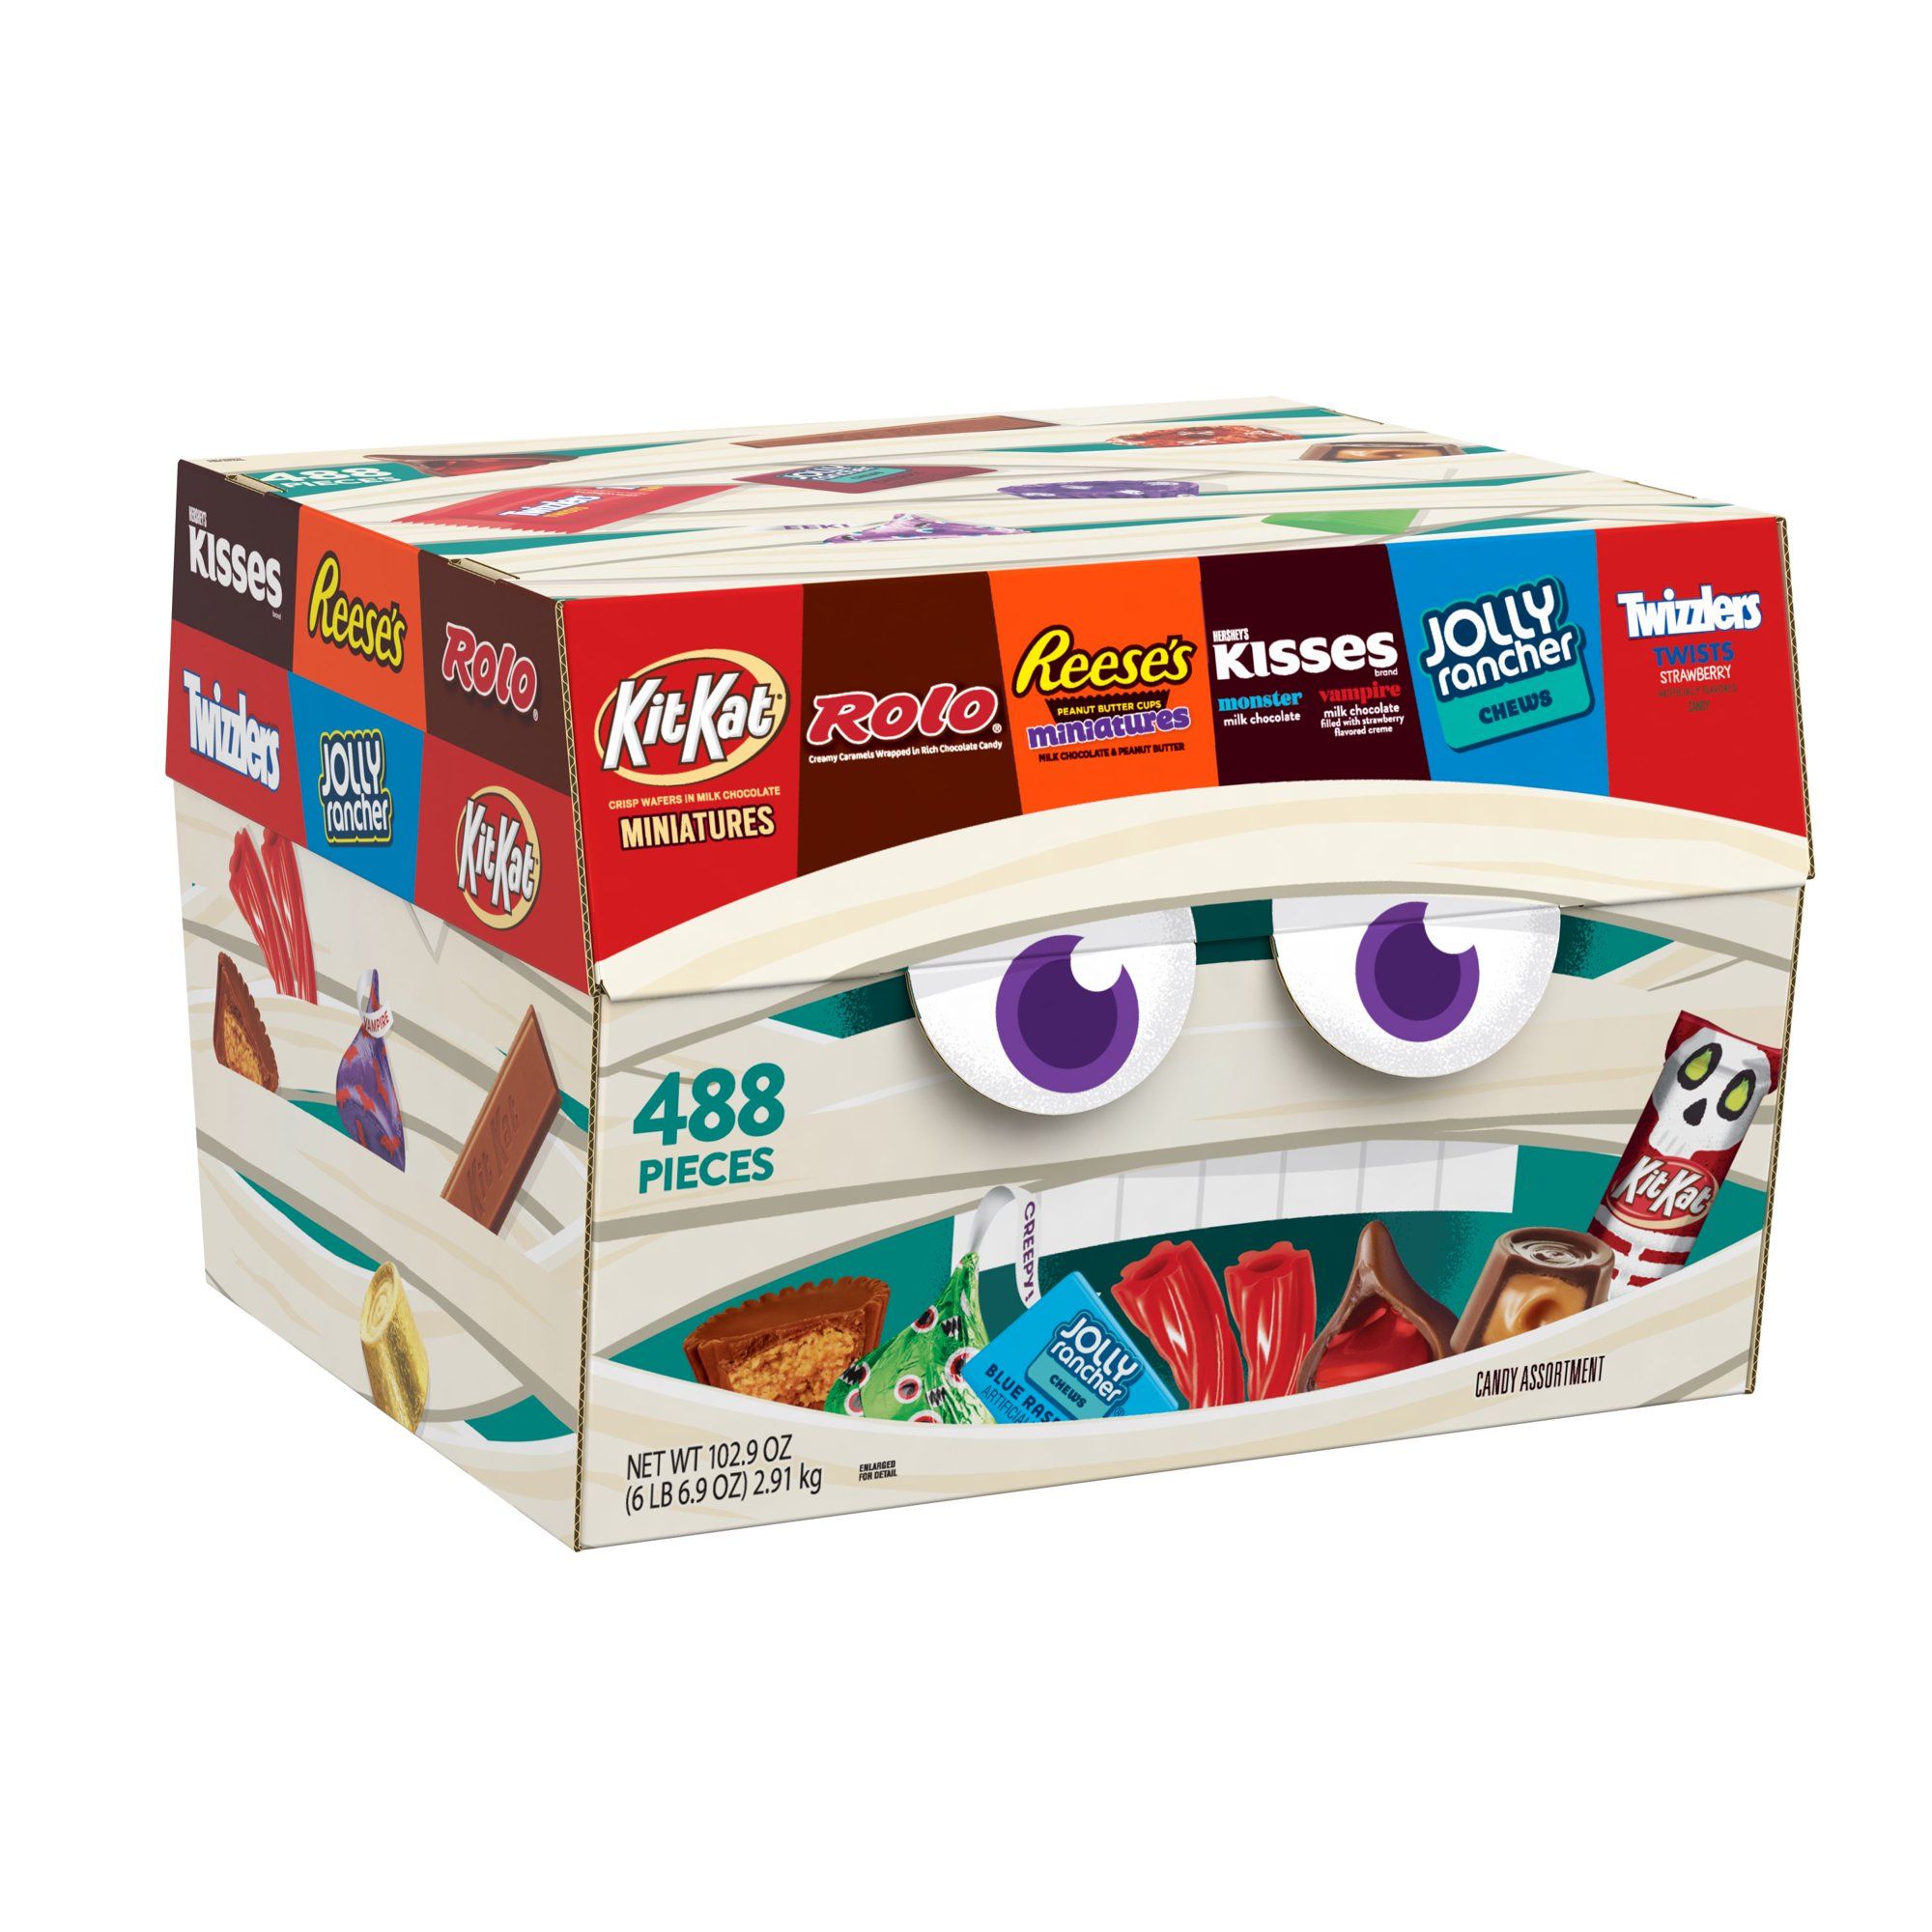 Walmart Is Selling A Box With 488 Pieces Of Halloween Candy To Enjoy All Year Long